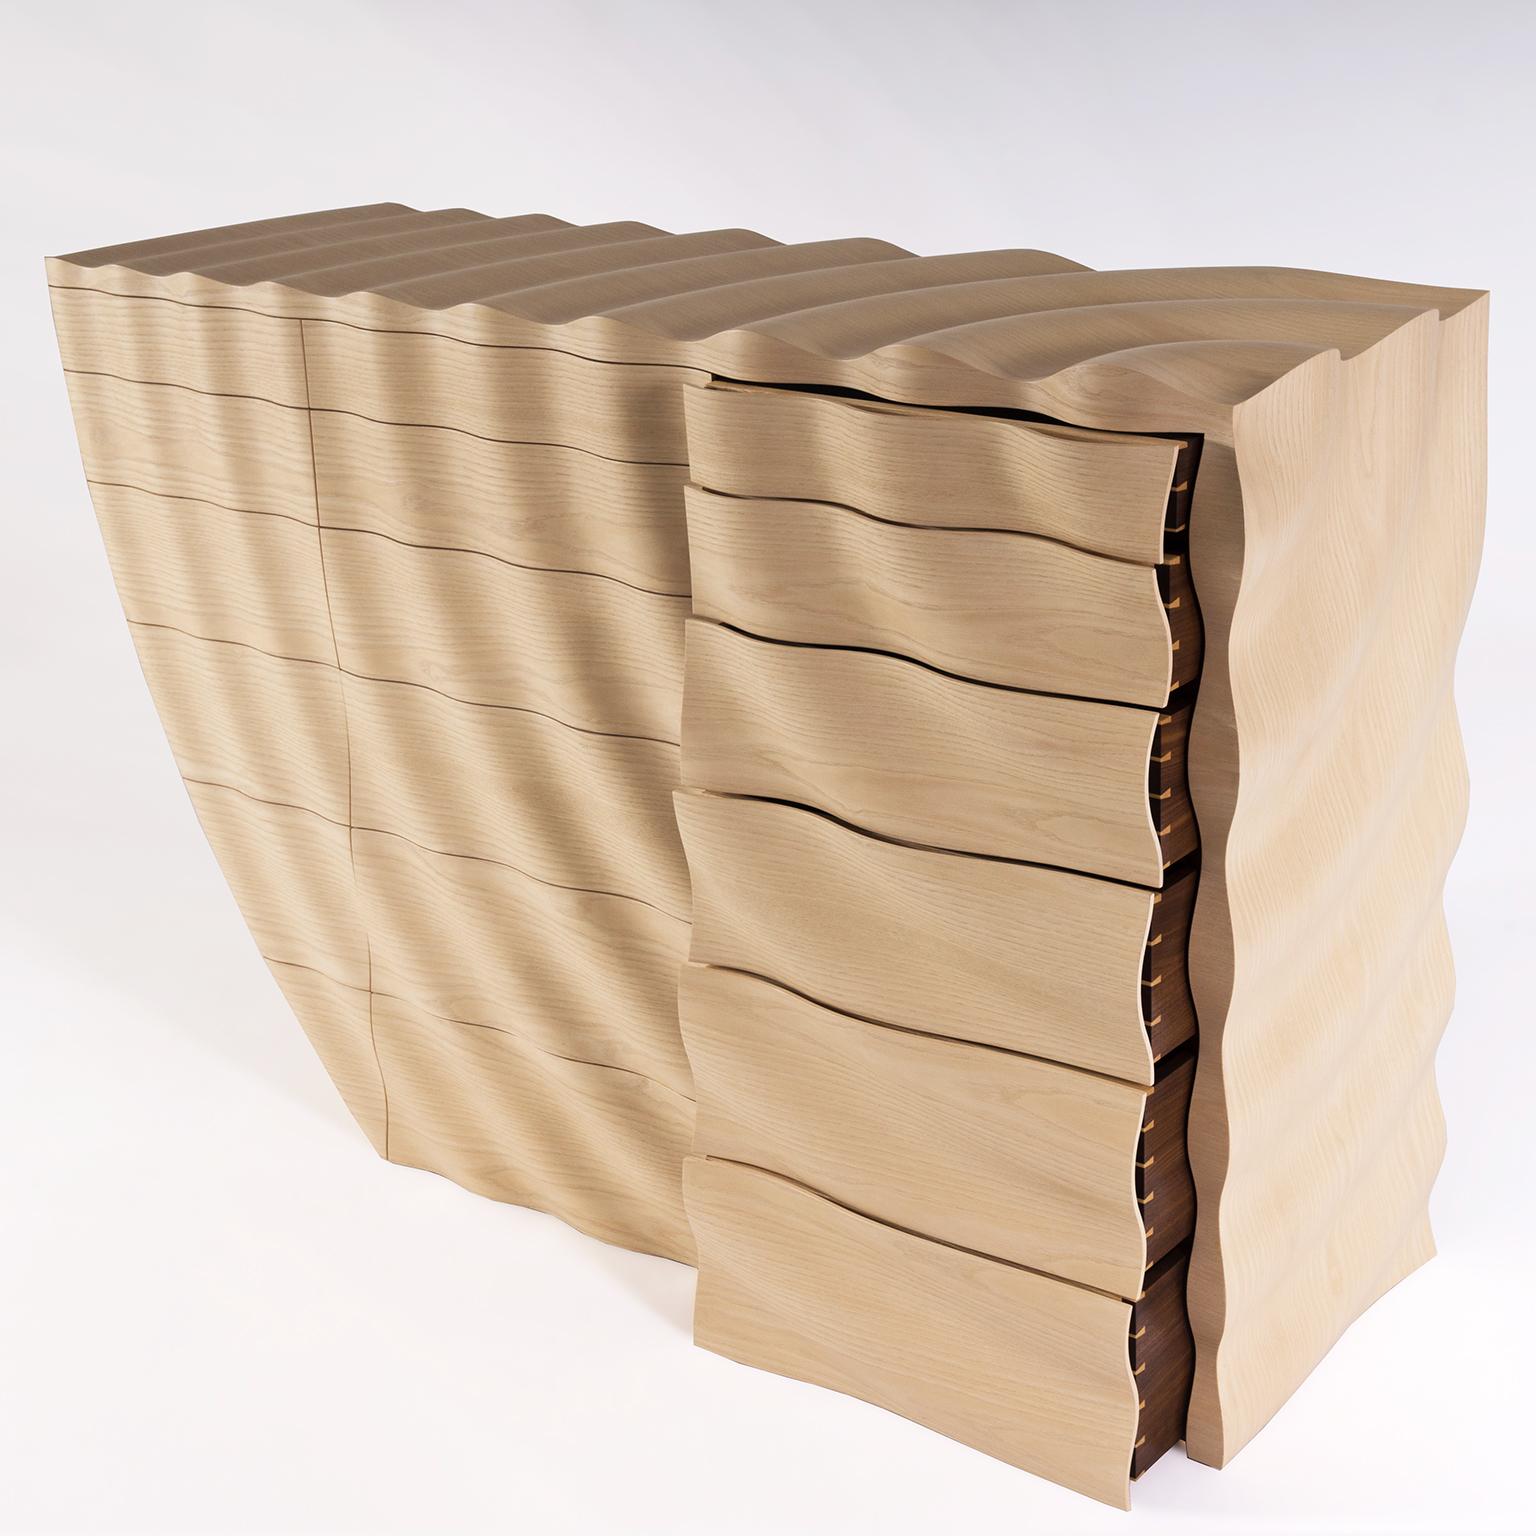 The contemporary 'Ripples' chest of drawers by Edward Johnson forms part of his Ripples Collection. Inspired by the action of a stone dropping into water, the principal intention was to produce a surface that could replicate the fluidity of water